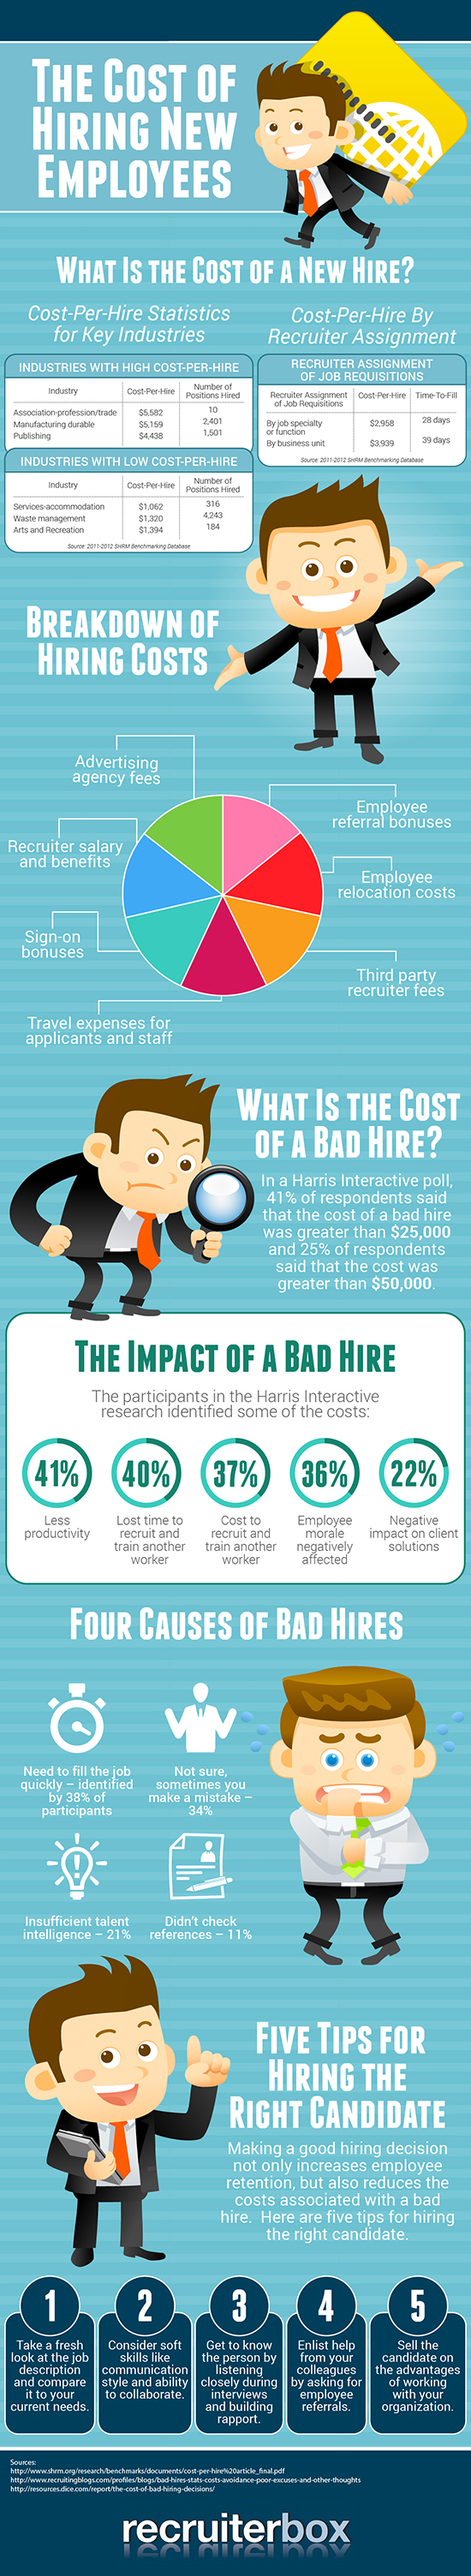 Cost of Hiring New Employees | Recruiterbox